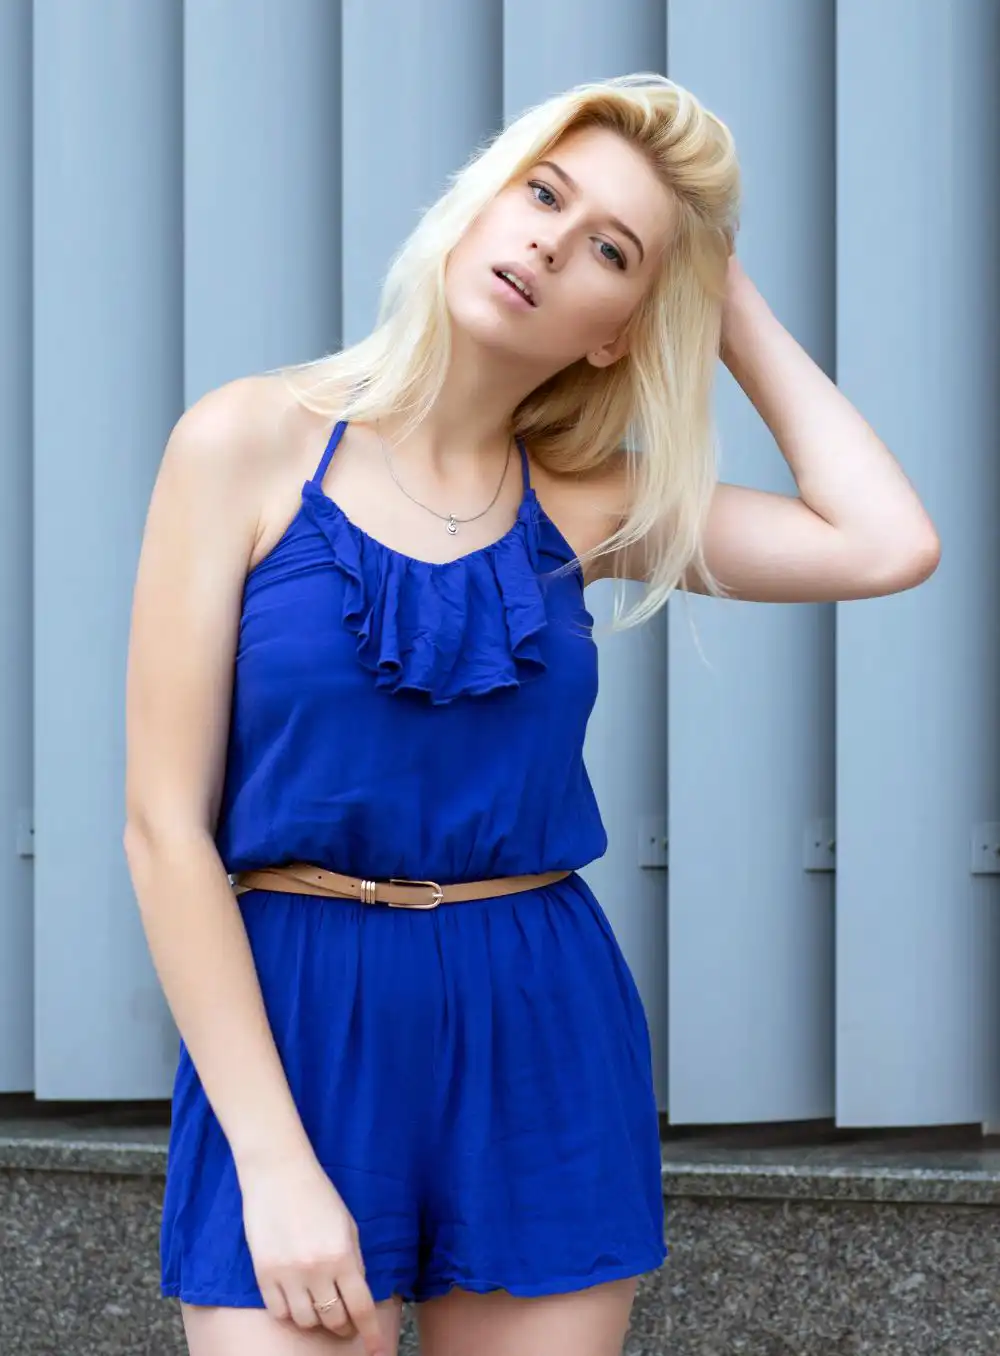 Blonde woman in fashionable romper